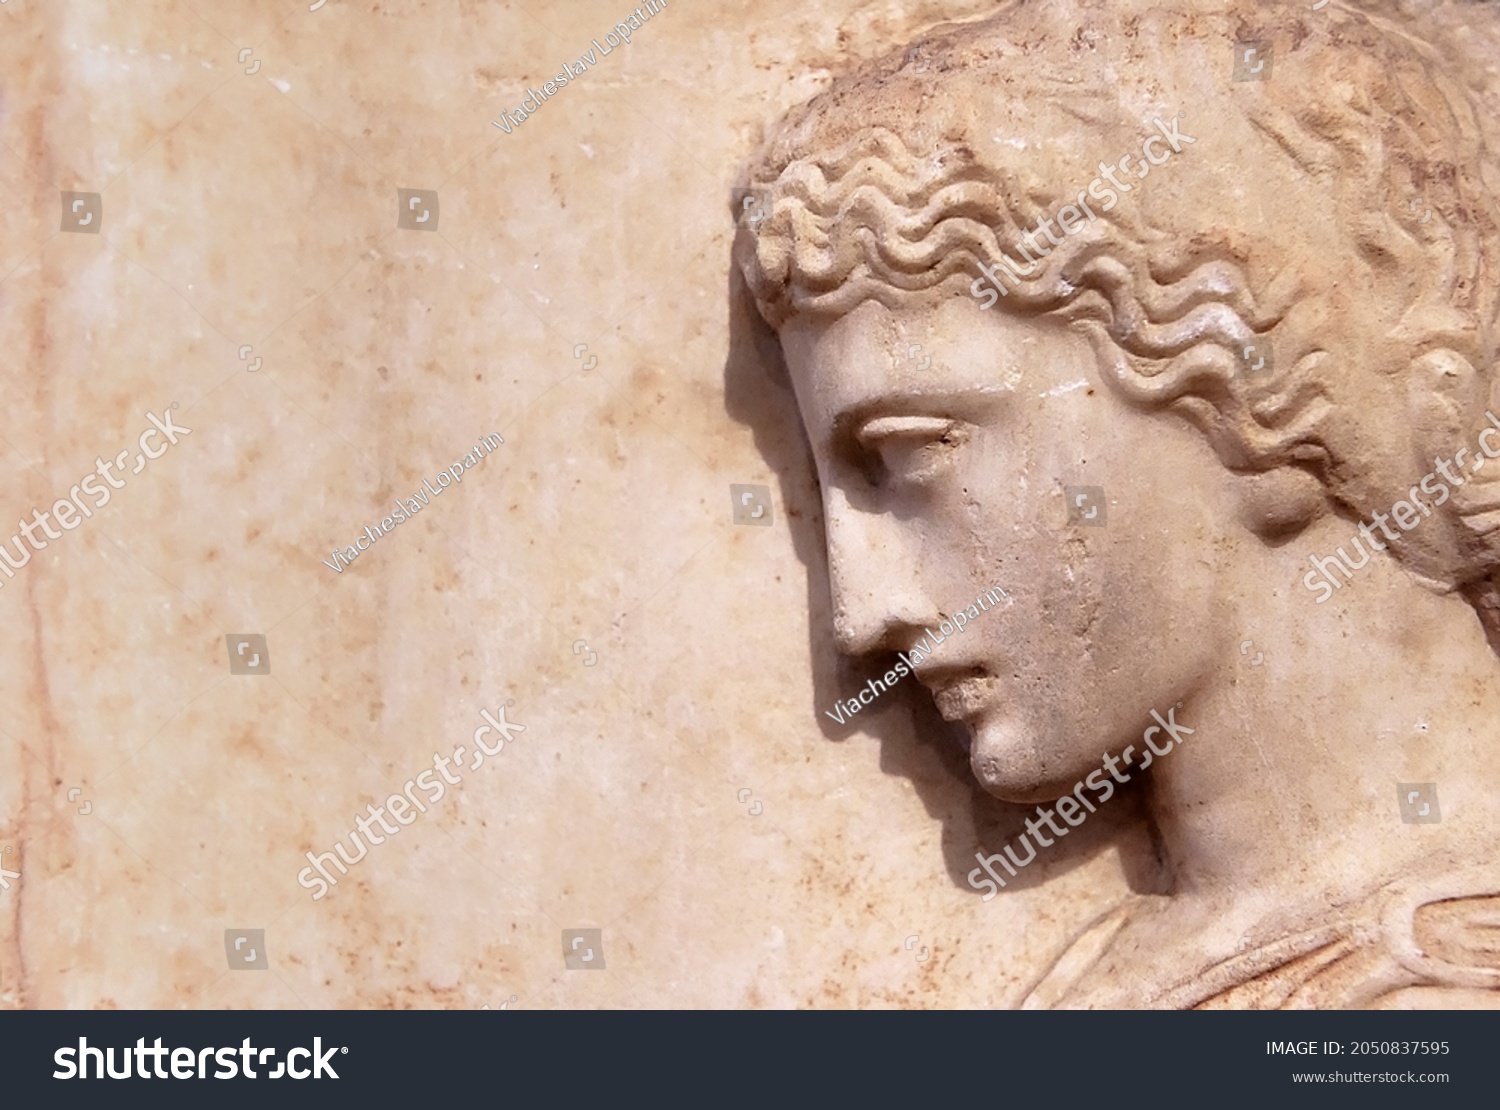 Ancient Greek relief of woman on marble wall, Greece. Beautiful stone sculpture, side view of face, art and history of old Greece. Concept of monument, culture, past civilization, antique and people. #2050837595